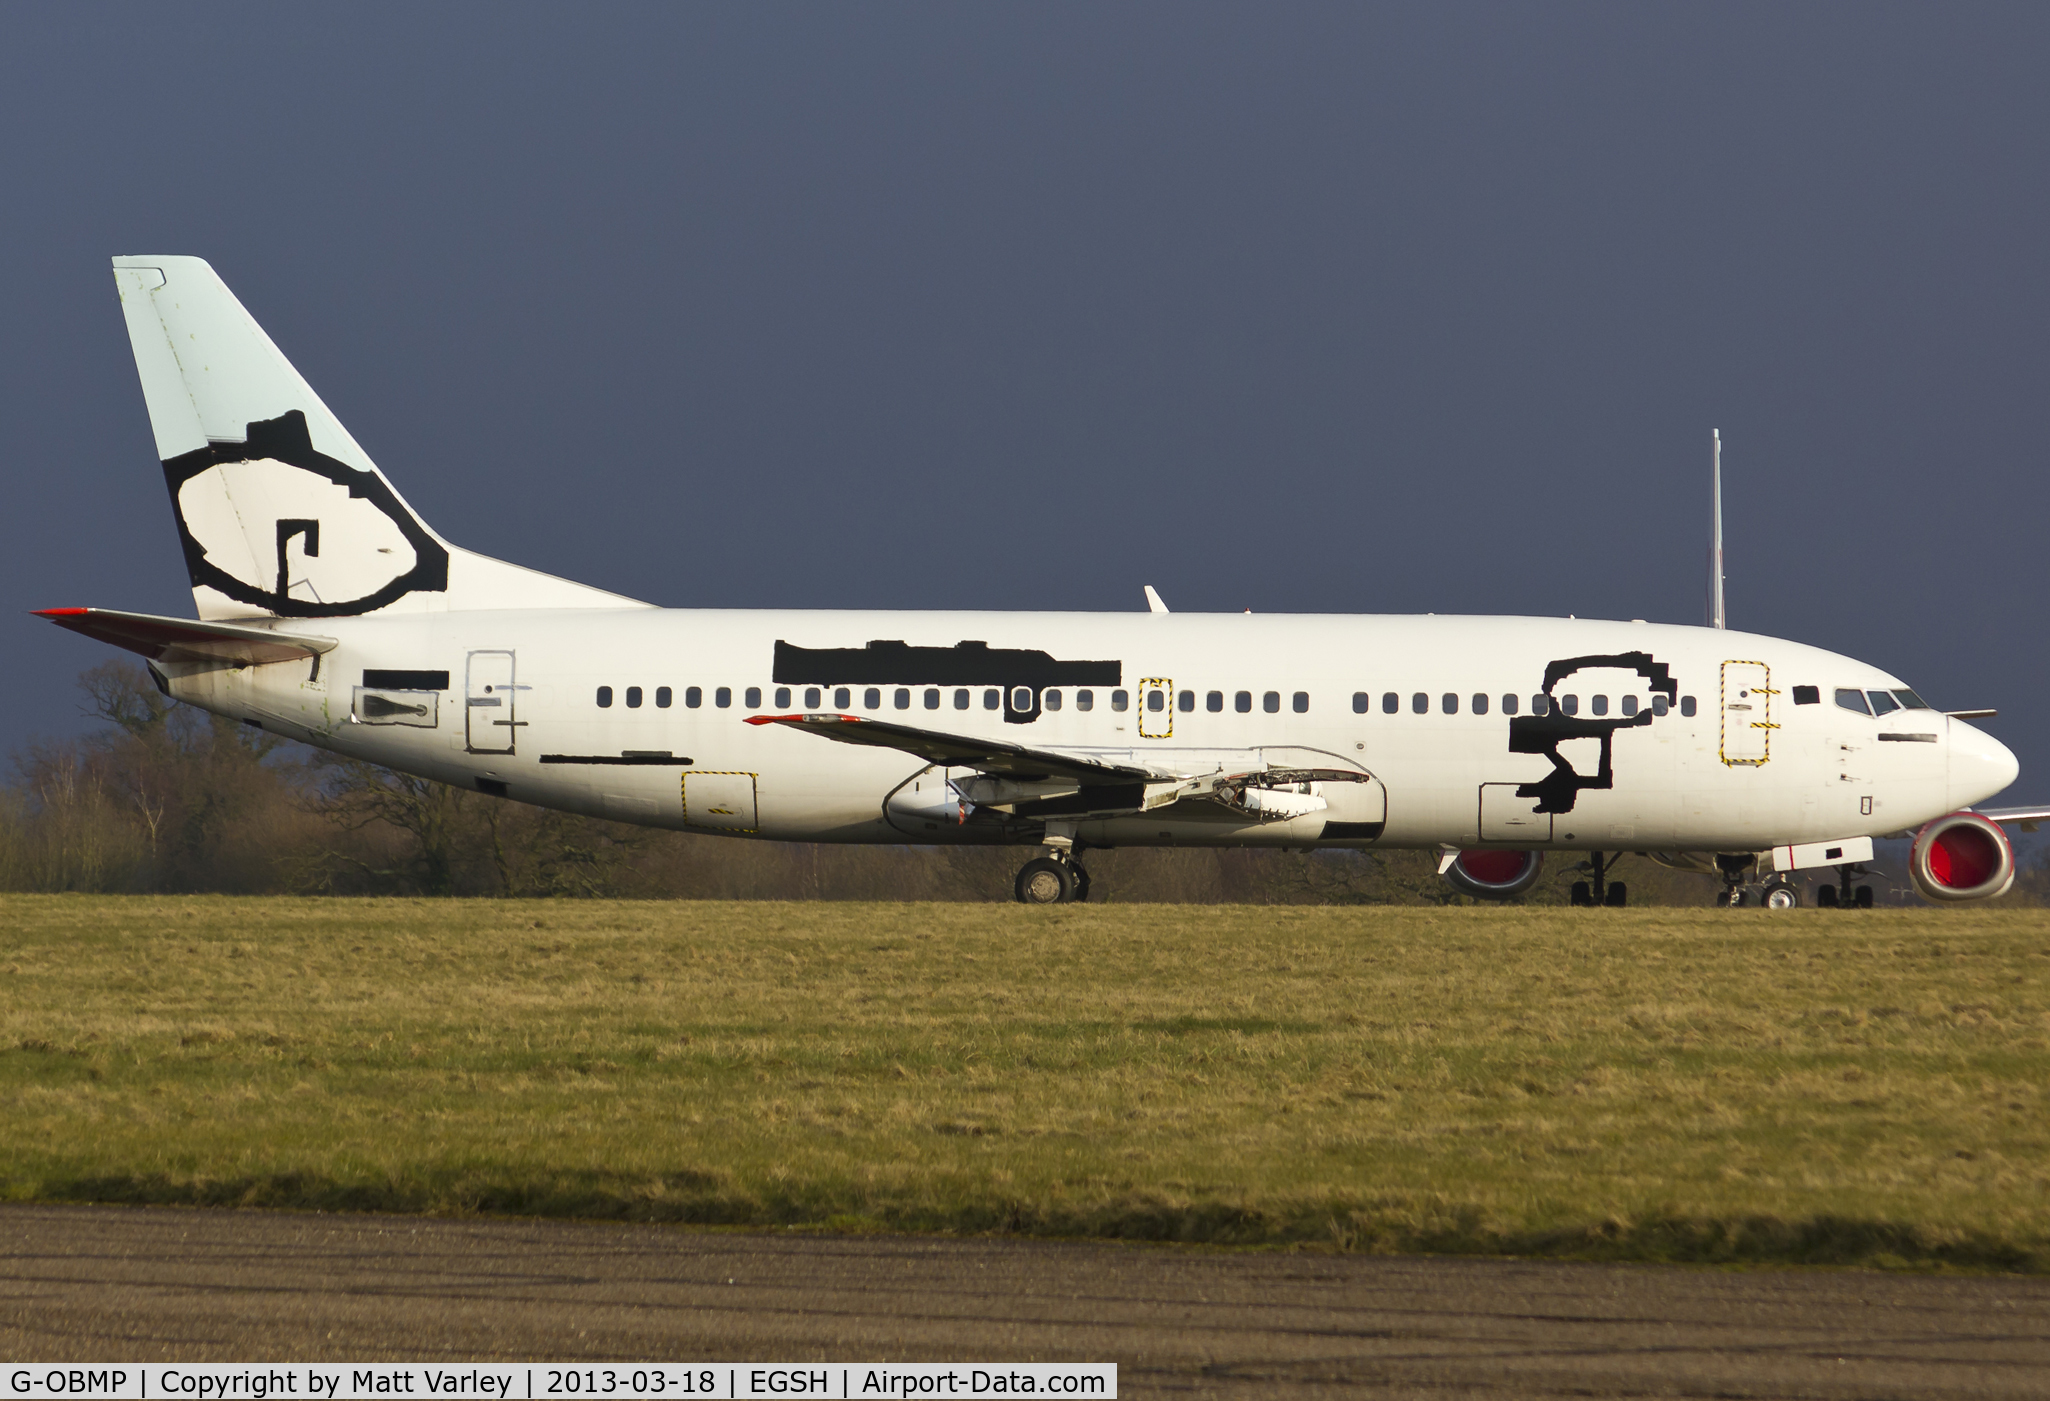 G-OBMP, 1992 Boeing 737-3Q8 C/N 24963, Sat at NWI with all markings taped over.